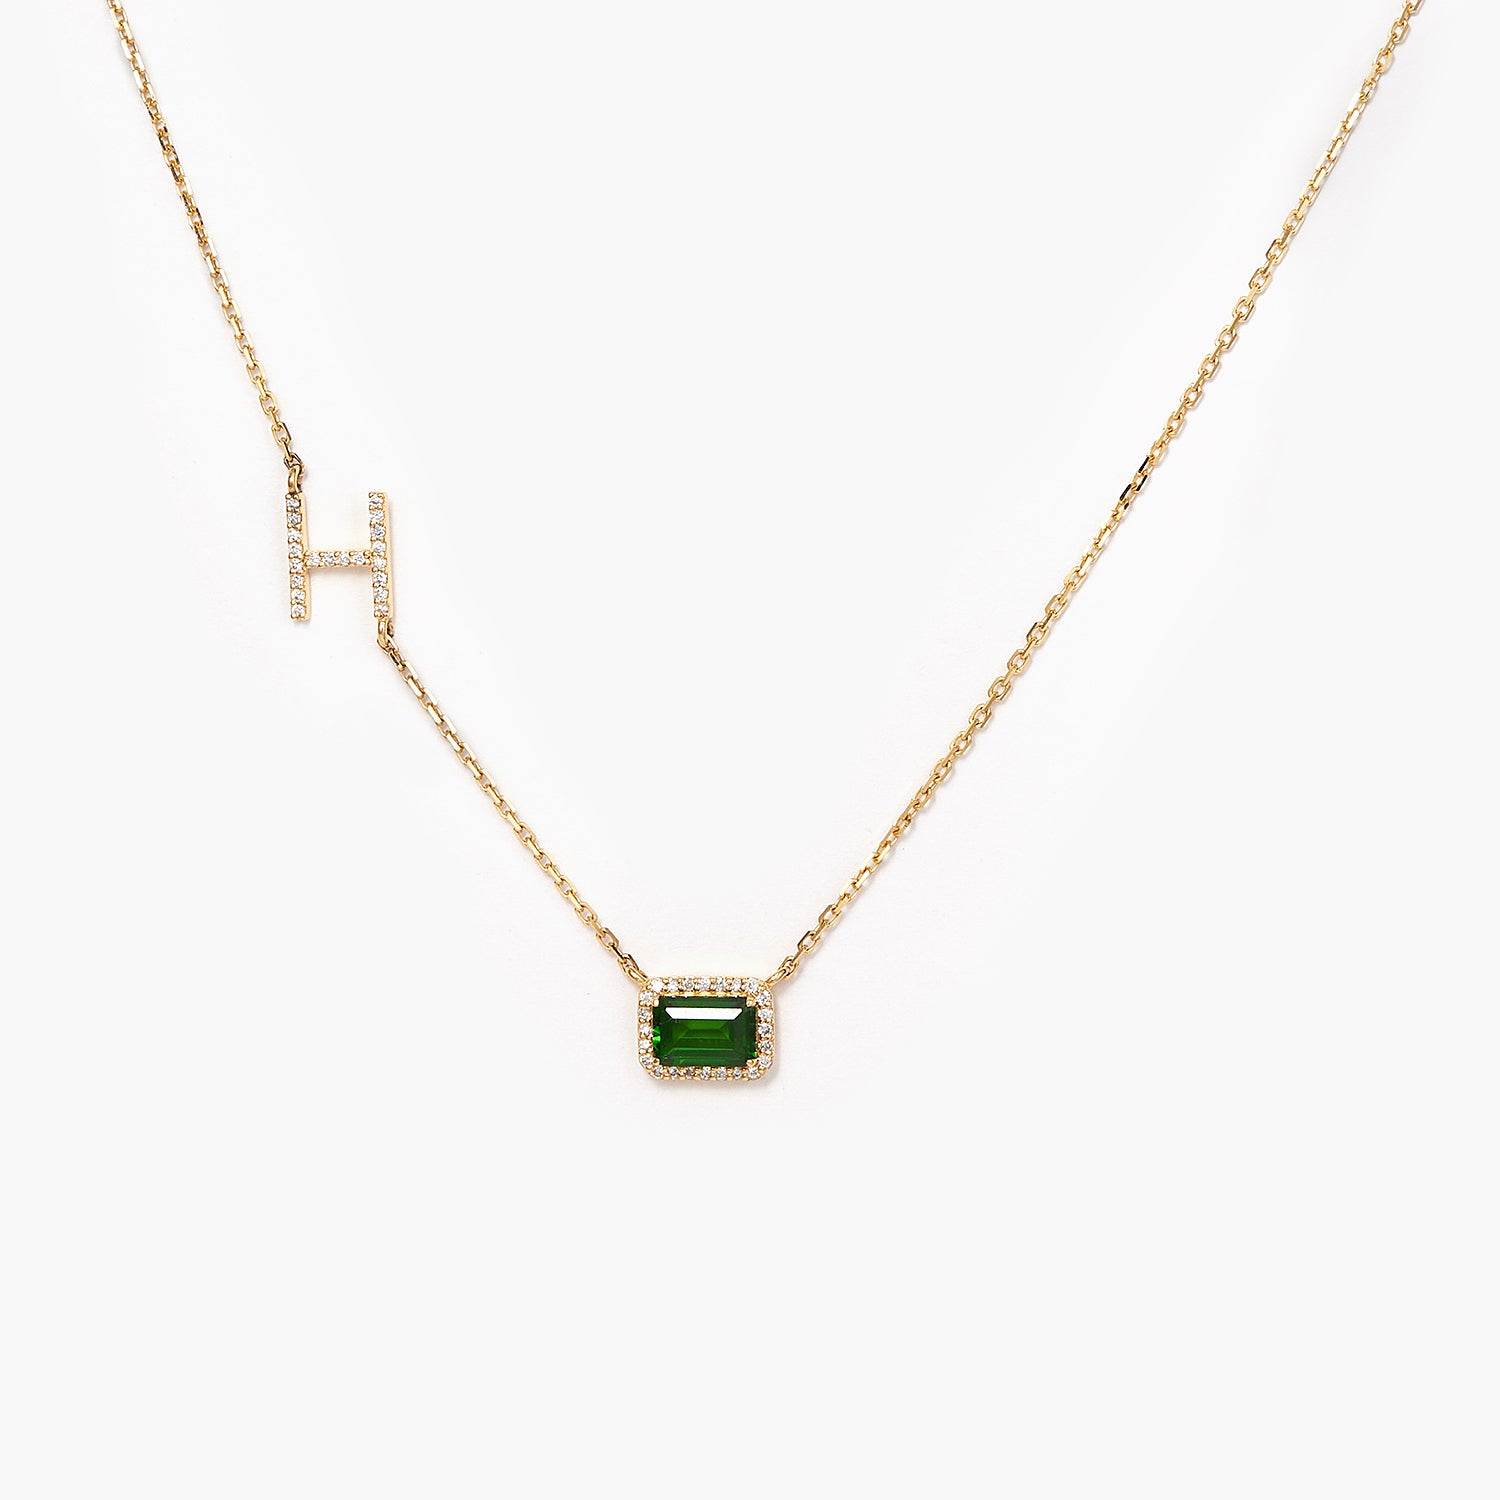 Fashion Dainty Diamond Inlaid Personalized Letters 4x6 Emeralds With Diamonds And Birthstone Initial Necklace